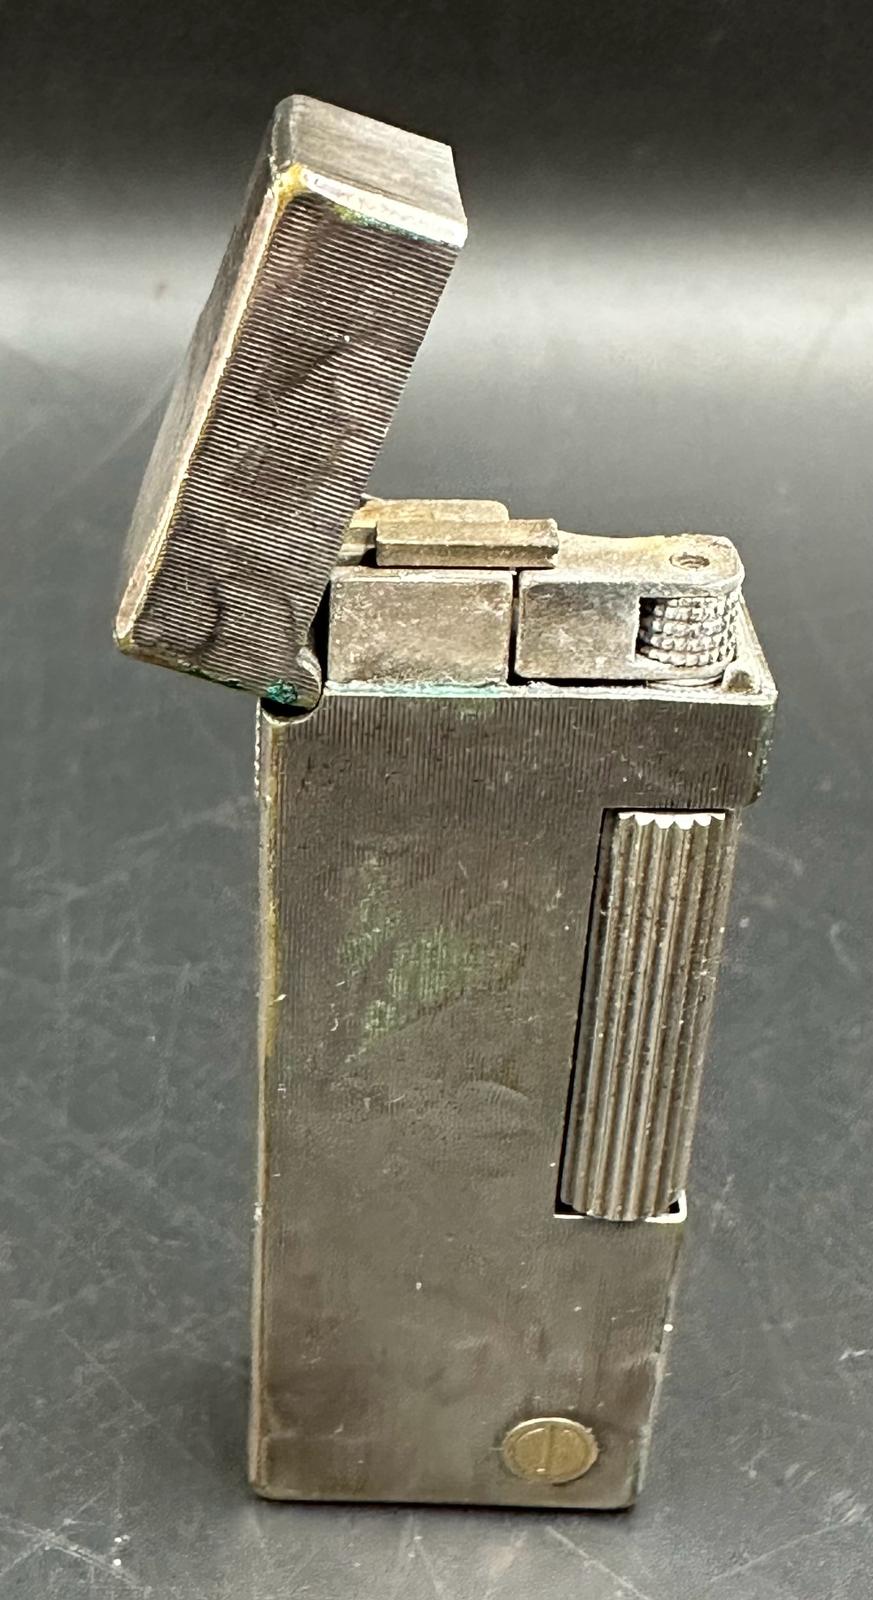 A Dunhill white metal lighter in original box with original paperwork, cards etc. - Image 3 of 5